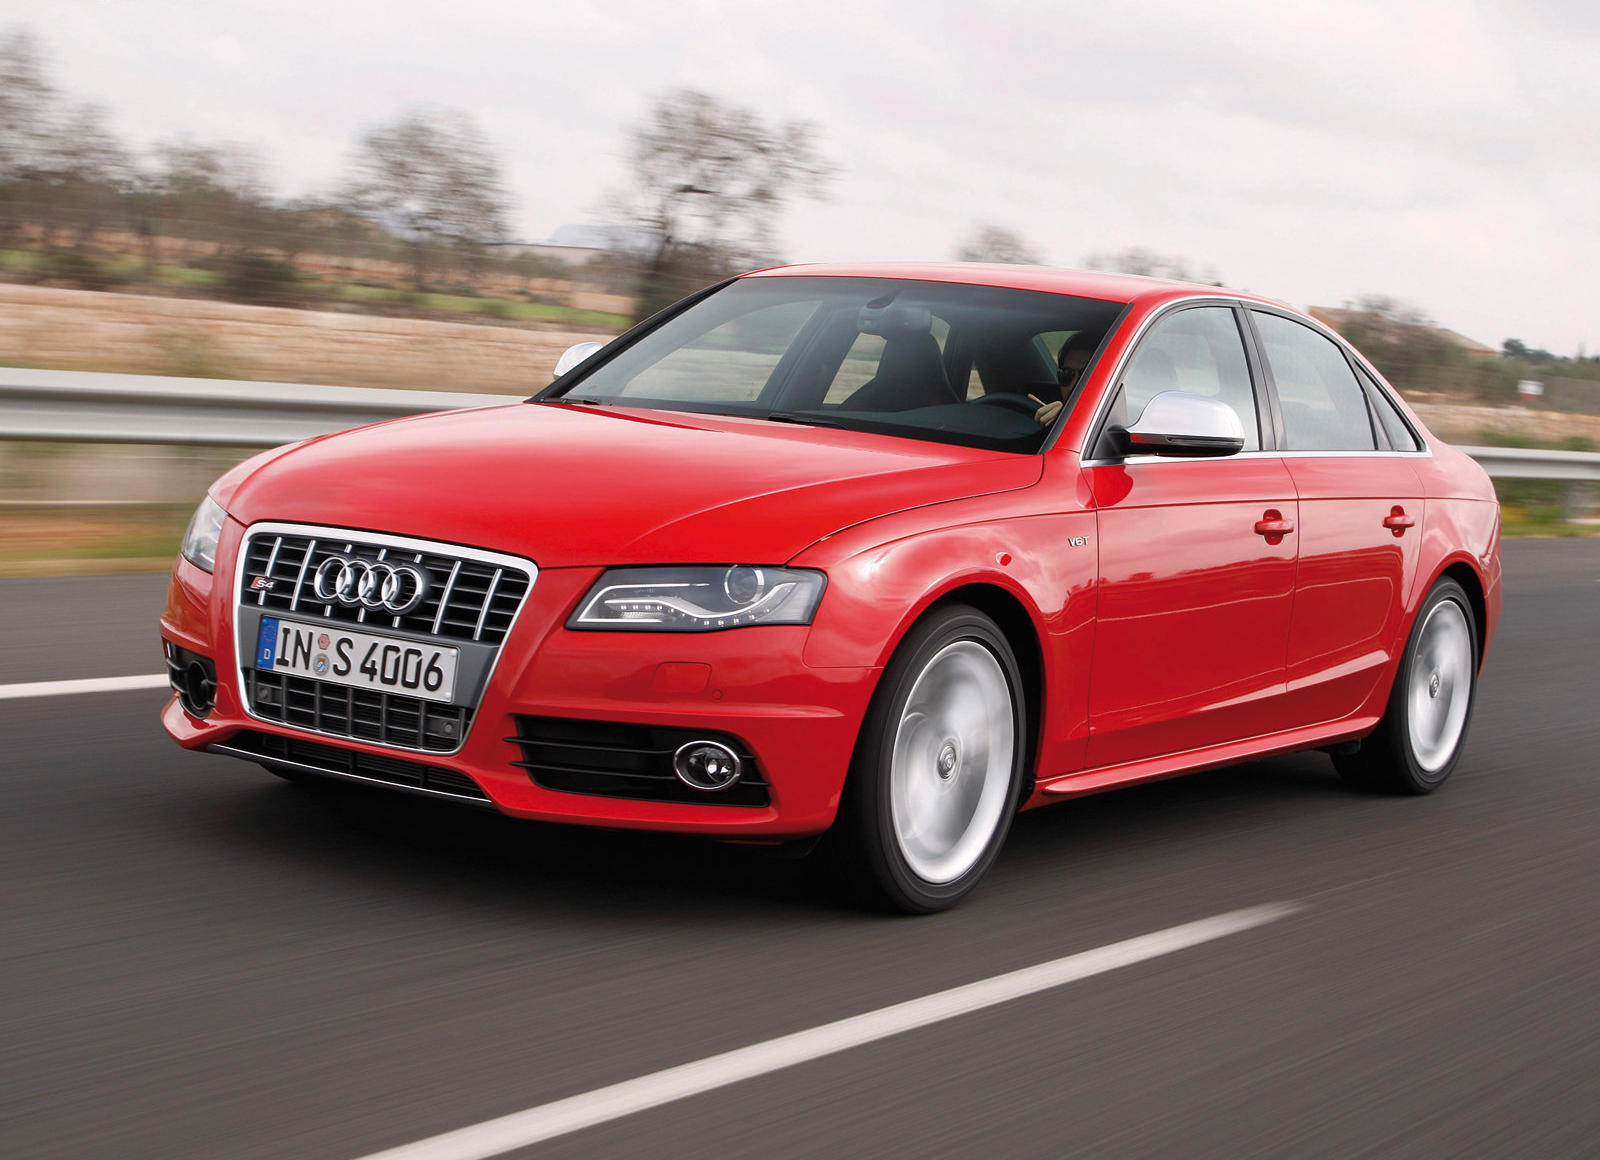 2010 Audi A4 Avant: Review, Trims, Specs, Price, New Interior Features,  Exterior Design, and Specifications